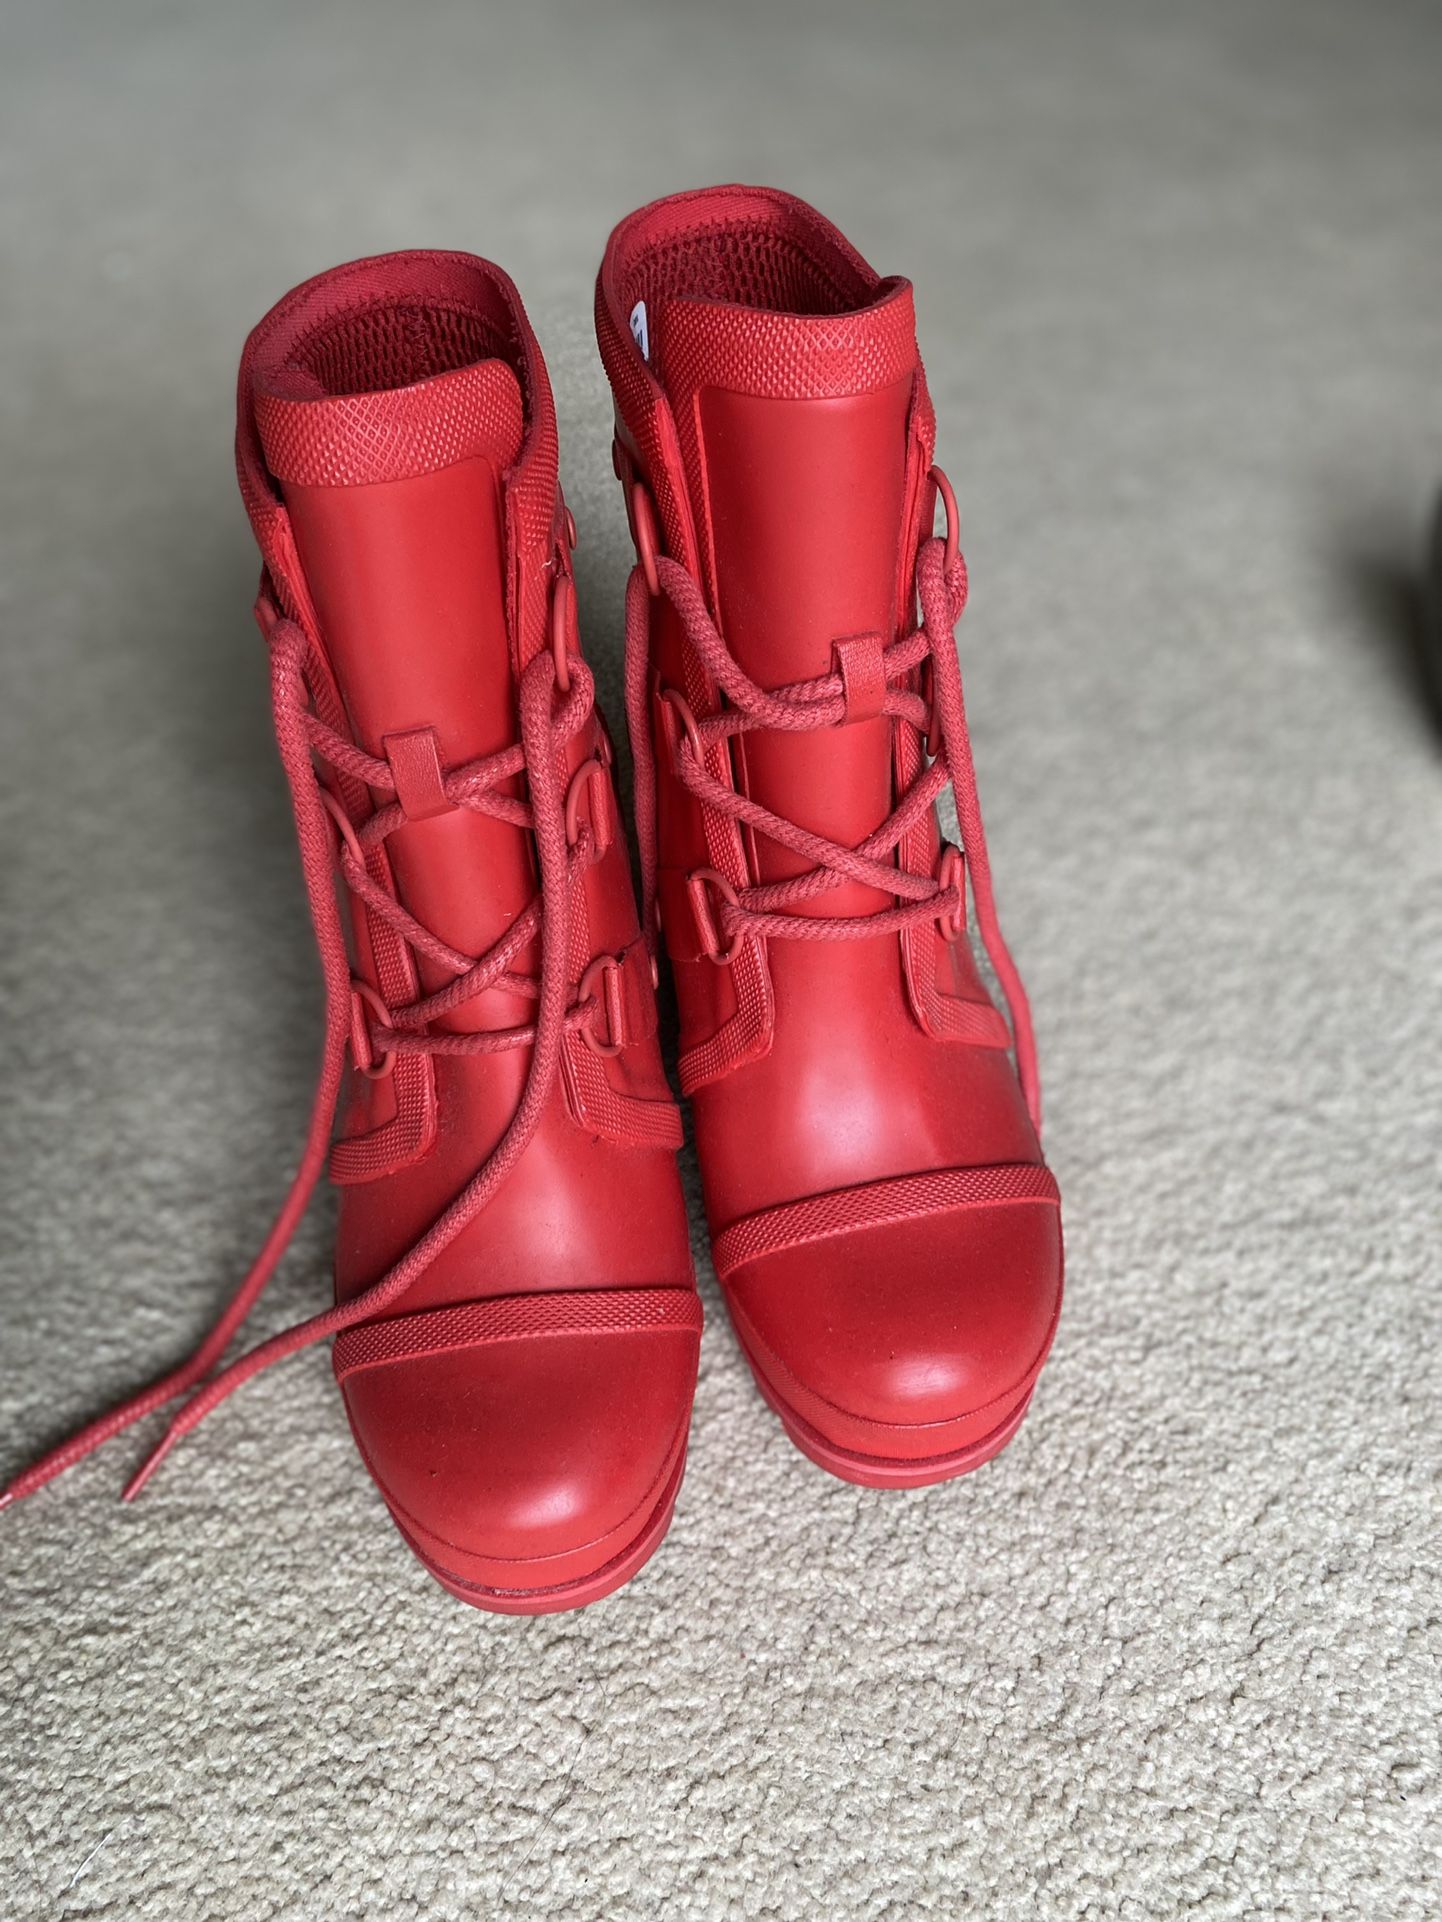 Sorel Red Boots  Size 8